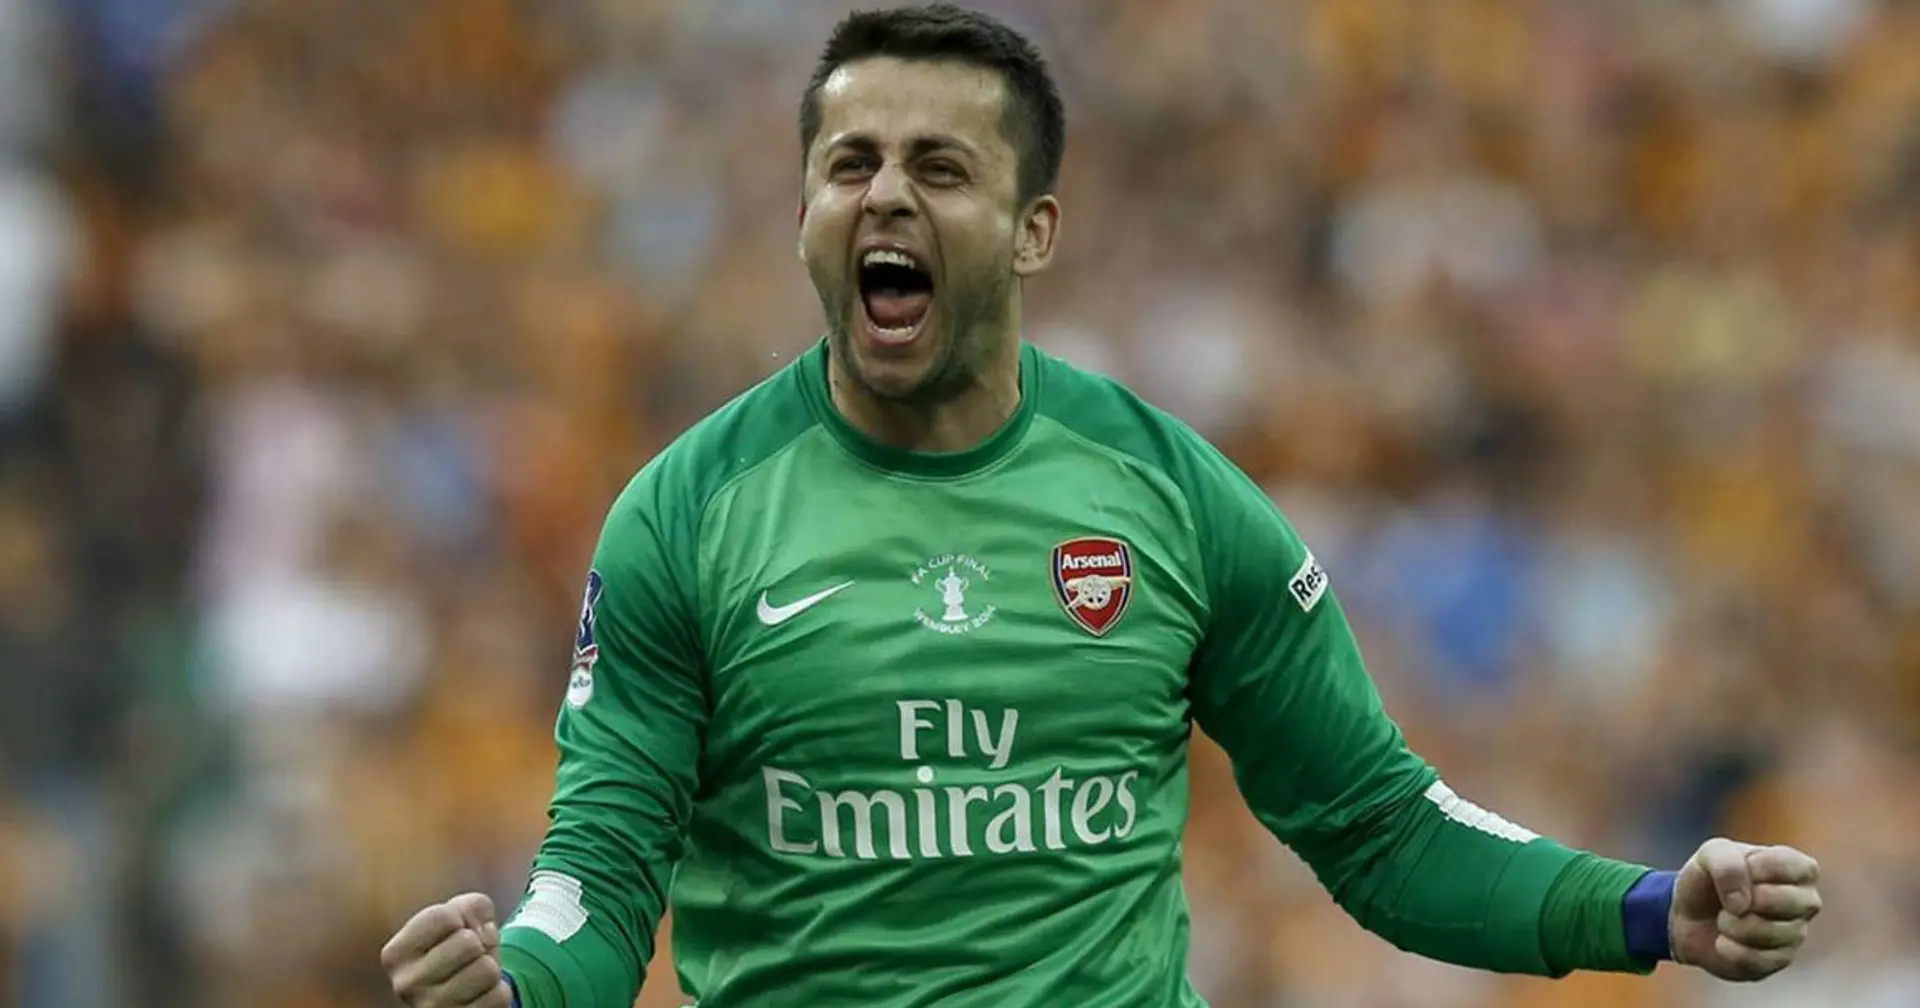 🎂 Another former Polish shot-stopper of our celebrates his Birthday today: Lukasz Fabianski turns 35! What's your favourite moment of his in red-and-white?